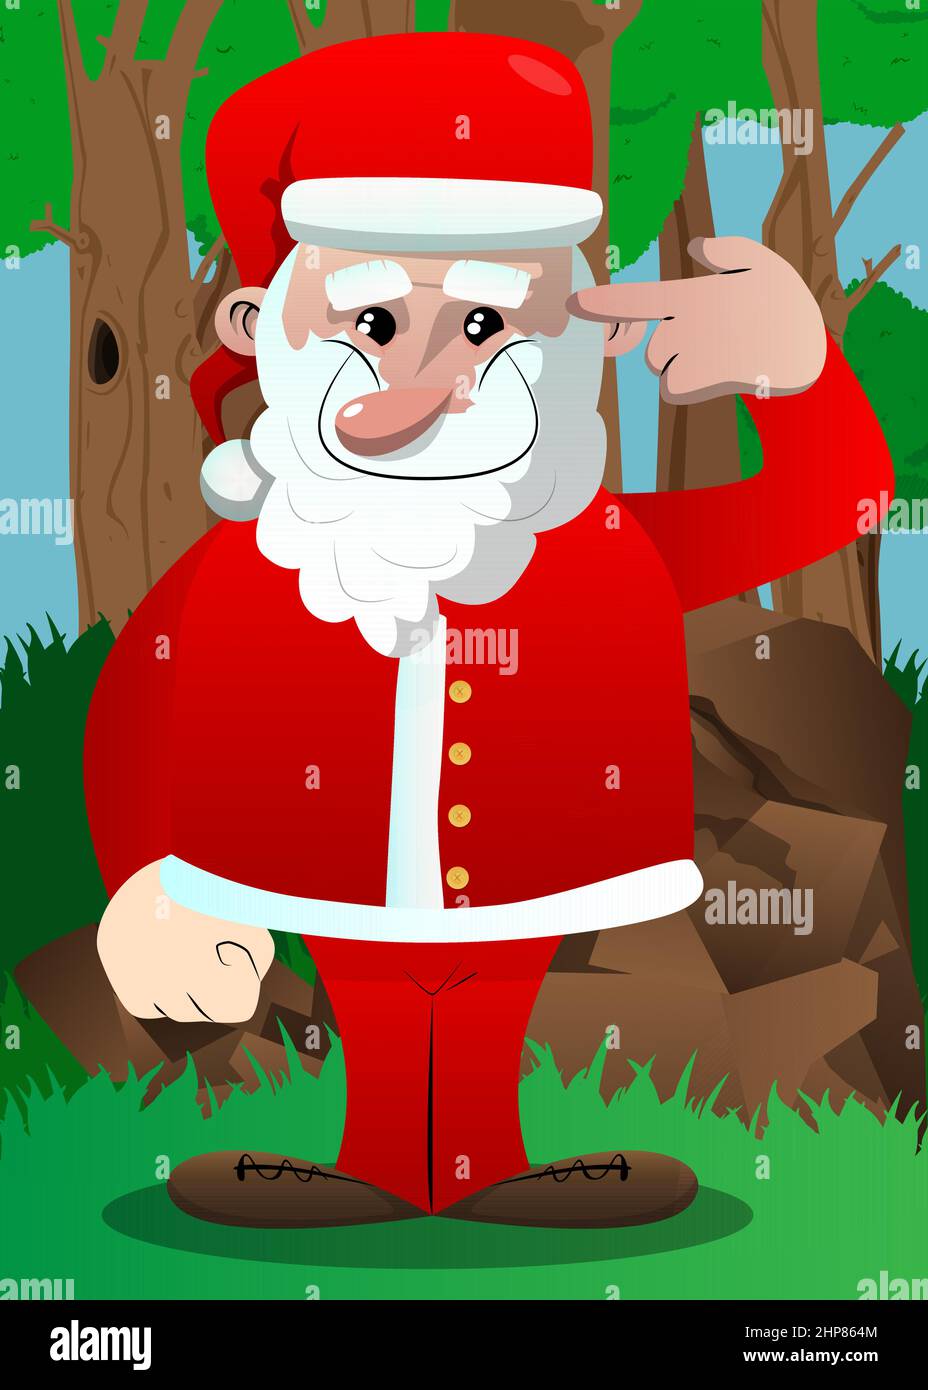 Santa Claus in his red clothes with white beard putting an imaginary gun to his head. Stock Vector